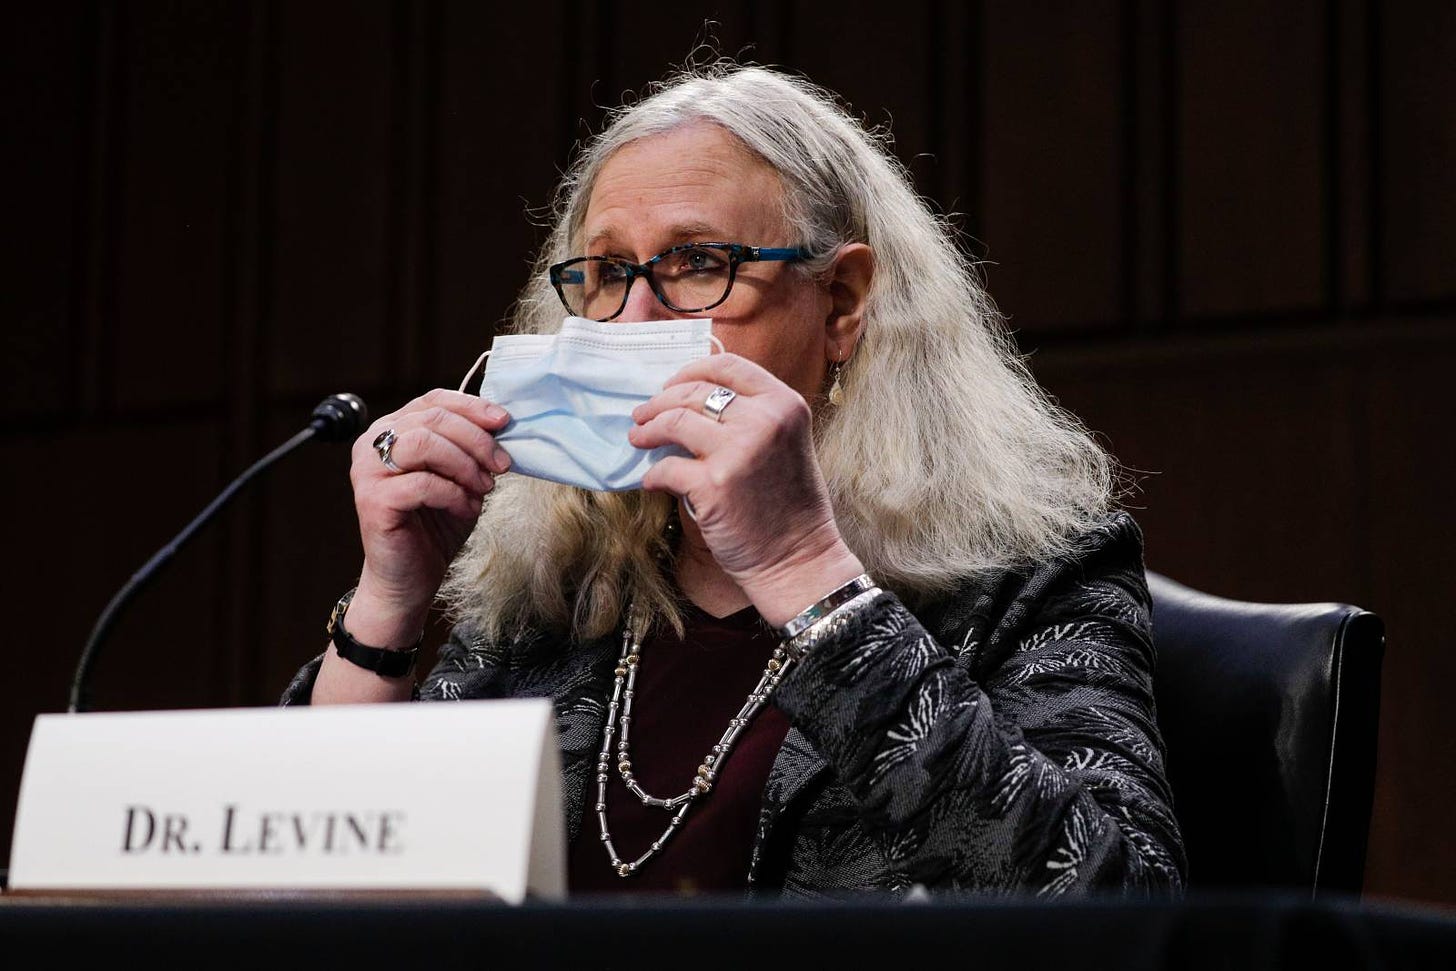 WASHINGTON, DC - FEBRUARY 25: Rachel Levine testifies at her confirmation hearing before the Senate Health, Education, Labor, and Pensions Committee on Feb. 25, 2021 in Washington D.C.